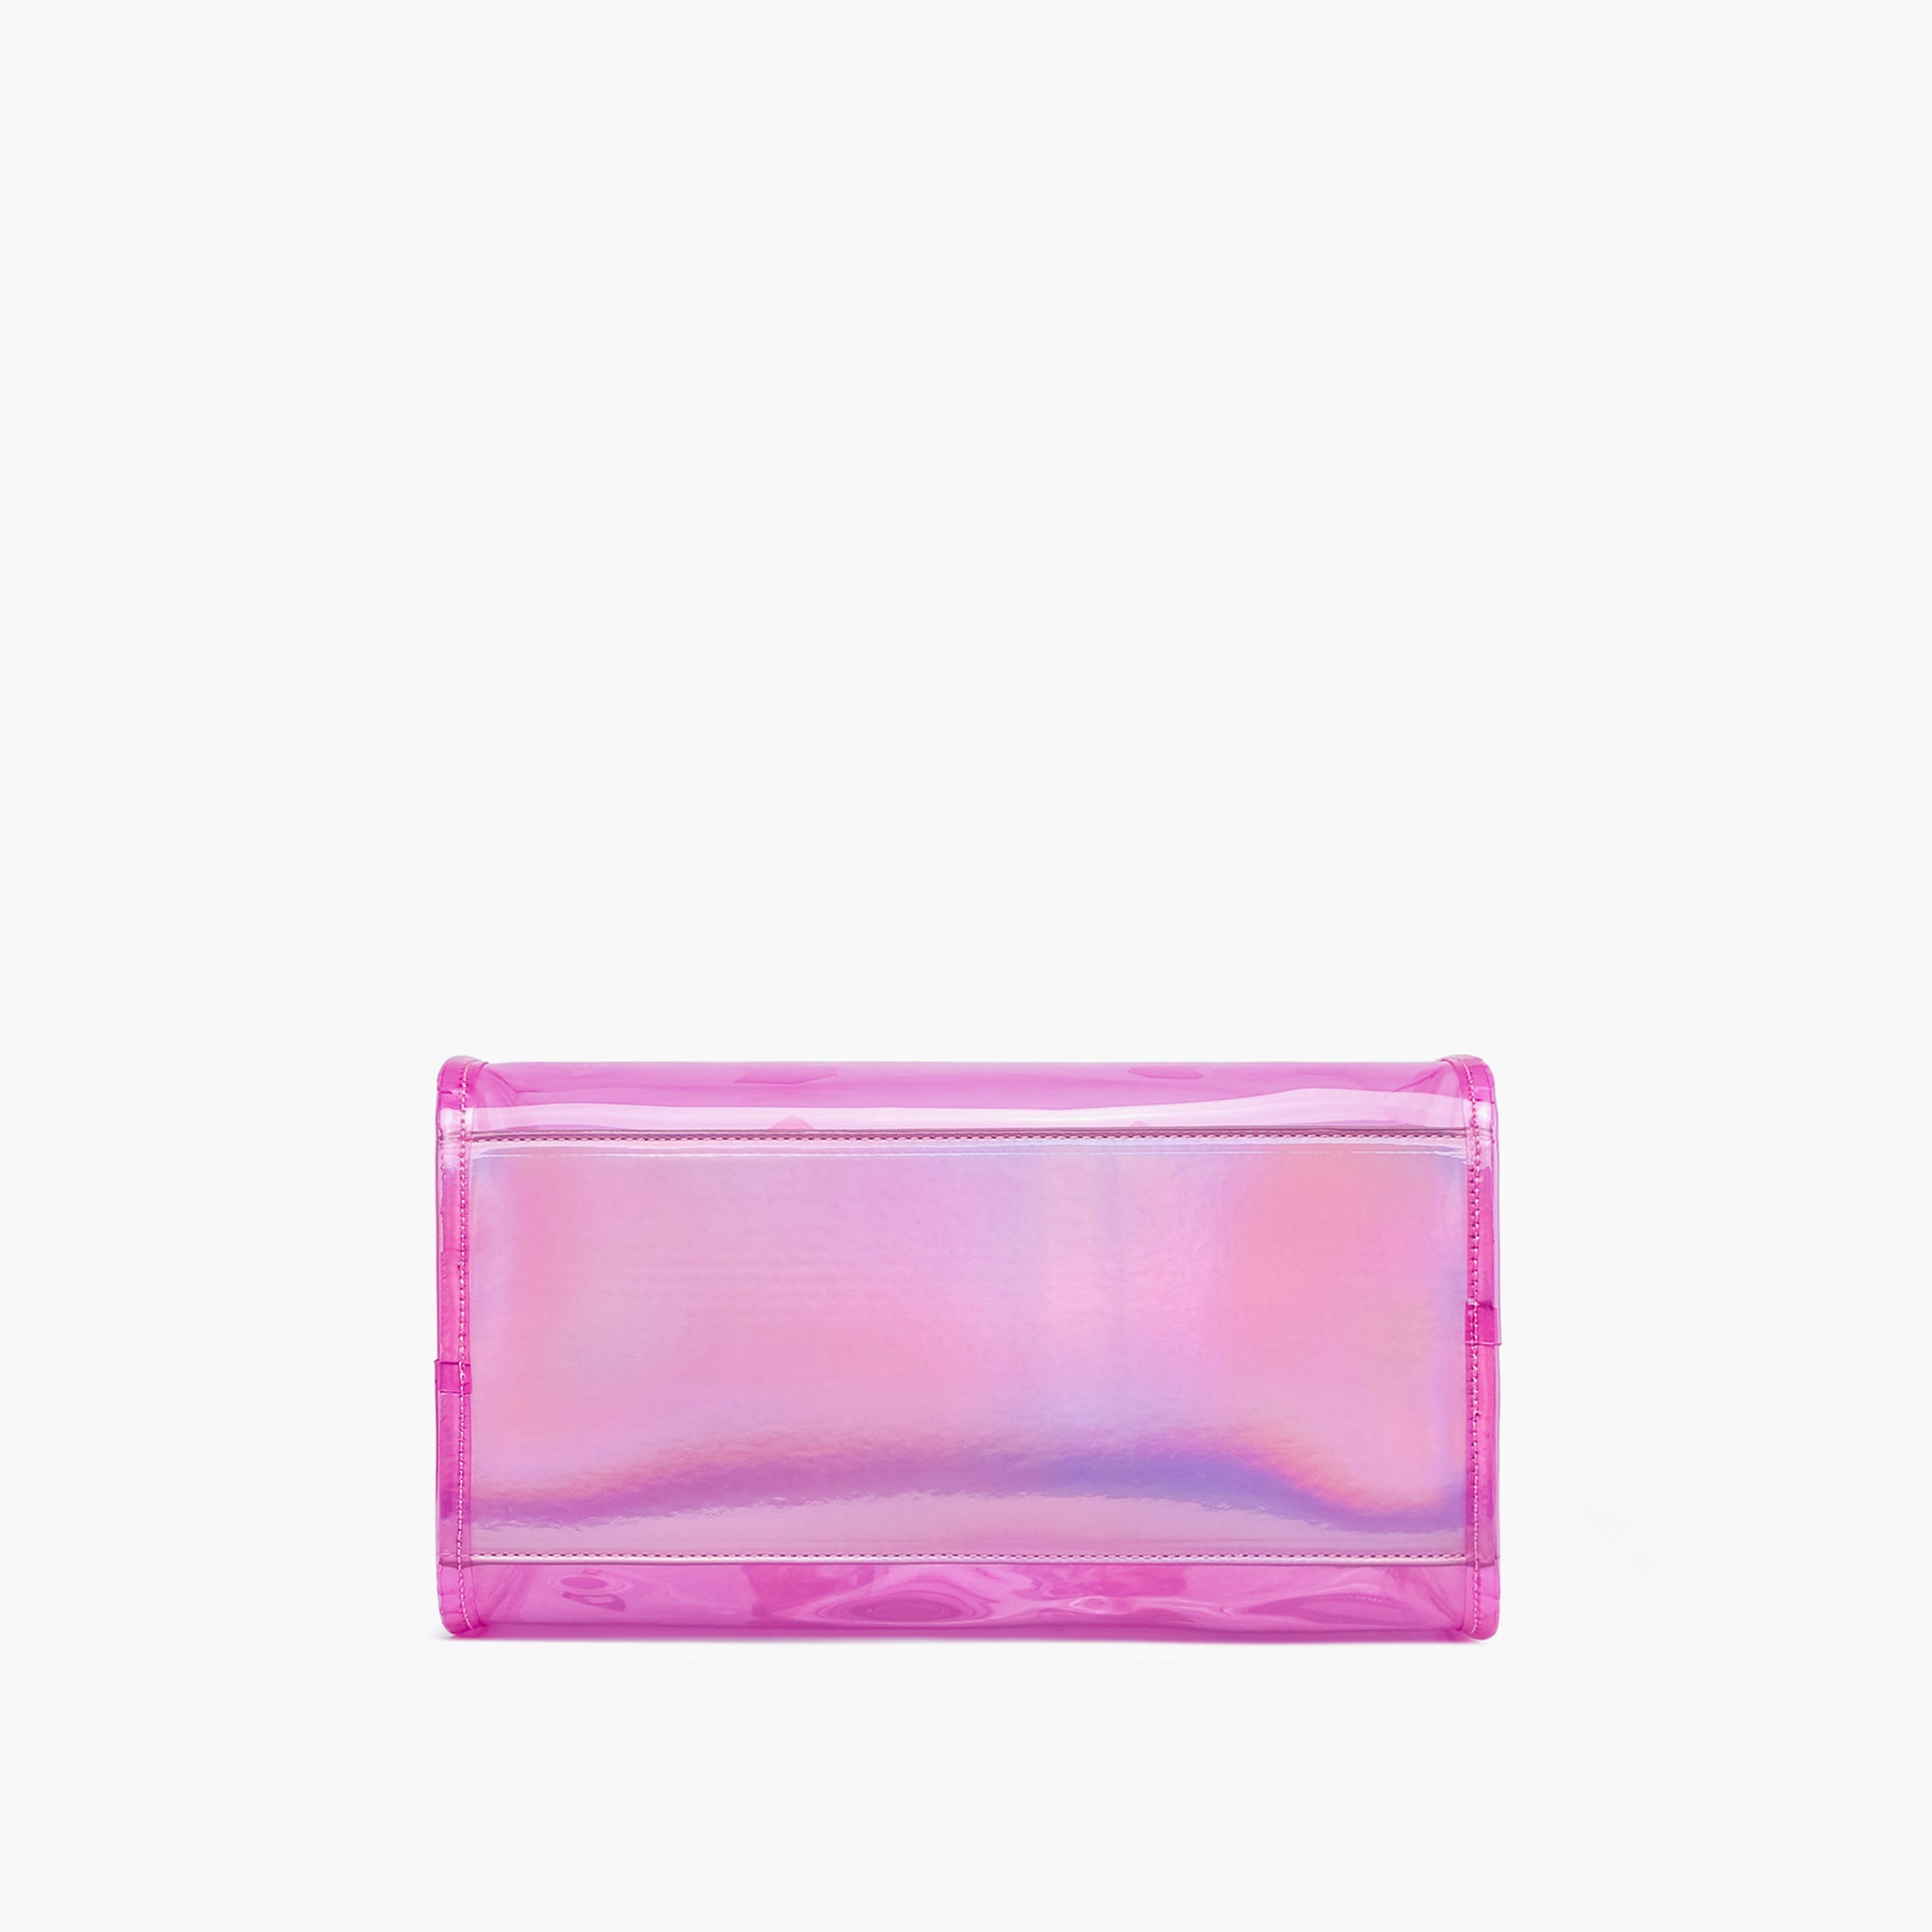 Holographic Quilted Top Handle Bag